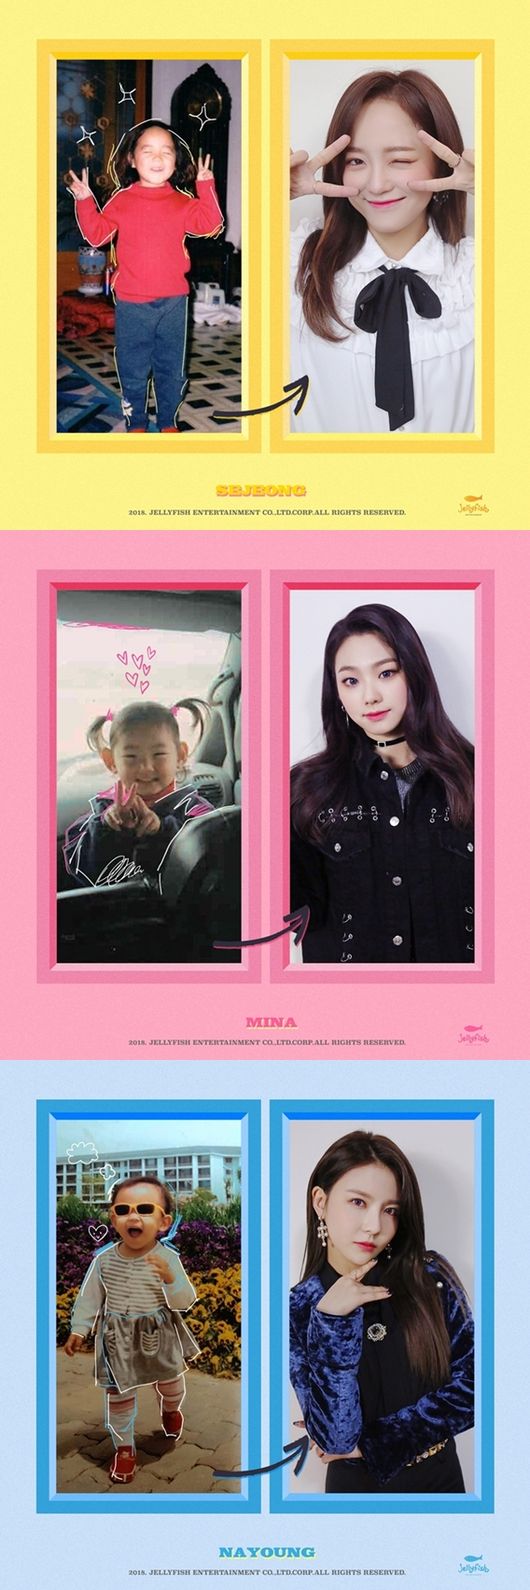 Gugudan Sejeong Mina Na Youngs cute childhood is revealed and draws Eye-catching.Gugudan Sejeong Mina Na Young is getting a hot response from fans by releasing photos of past childhood through various official SNS channels of her agency Jellyfish Entertainment at 0:00 on the 30th.In the public childhood photos, Sejeong is now loved by the public with a healthy image and lively energy, so he takes a clear pose even in his childhood and attracts Eye-catching.The cute yet youthful charm is seen in childhood and shows a sample of a well-growing child.Mina boasts a clear eye with a Down charm with a pair of hair styles.The half-moon eyes, which became the trademark of Mina now 20 years old, are clearly visible even in childhood.As Na-young, who grew up as a pelvic goddess, she also wears sunglasses in colorful sneakers in her childhood, showing her fashionable charm in the future.All three showed a good example of a well-bred child and proved to be a beautiful look icon.Fans who encountered the photos responded hotly, saying, Sejeong, Mina, and Na Young have grown healthy and beautiful with their charms.Earlier, Sejeong Mina Na Young made a surprise release of the jackpot teaser video, and further upgraded the class of All A class, which was introduced at the time of Mnet Produce 101, to capture the publics eye-catching.Sejeong Mina Na Young, who is considered a perfect combination from Fdu, will release the new content on the single album released on July 10th.Jellyfish Entertainment.